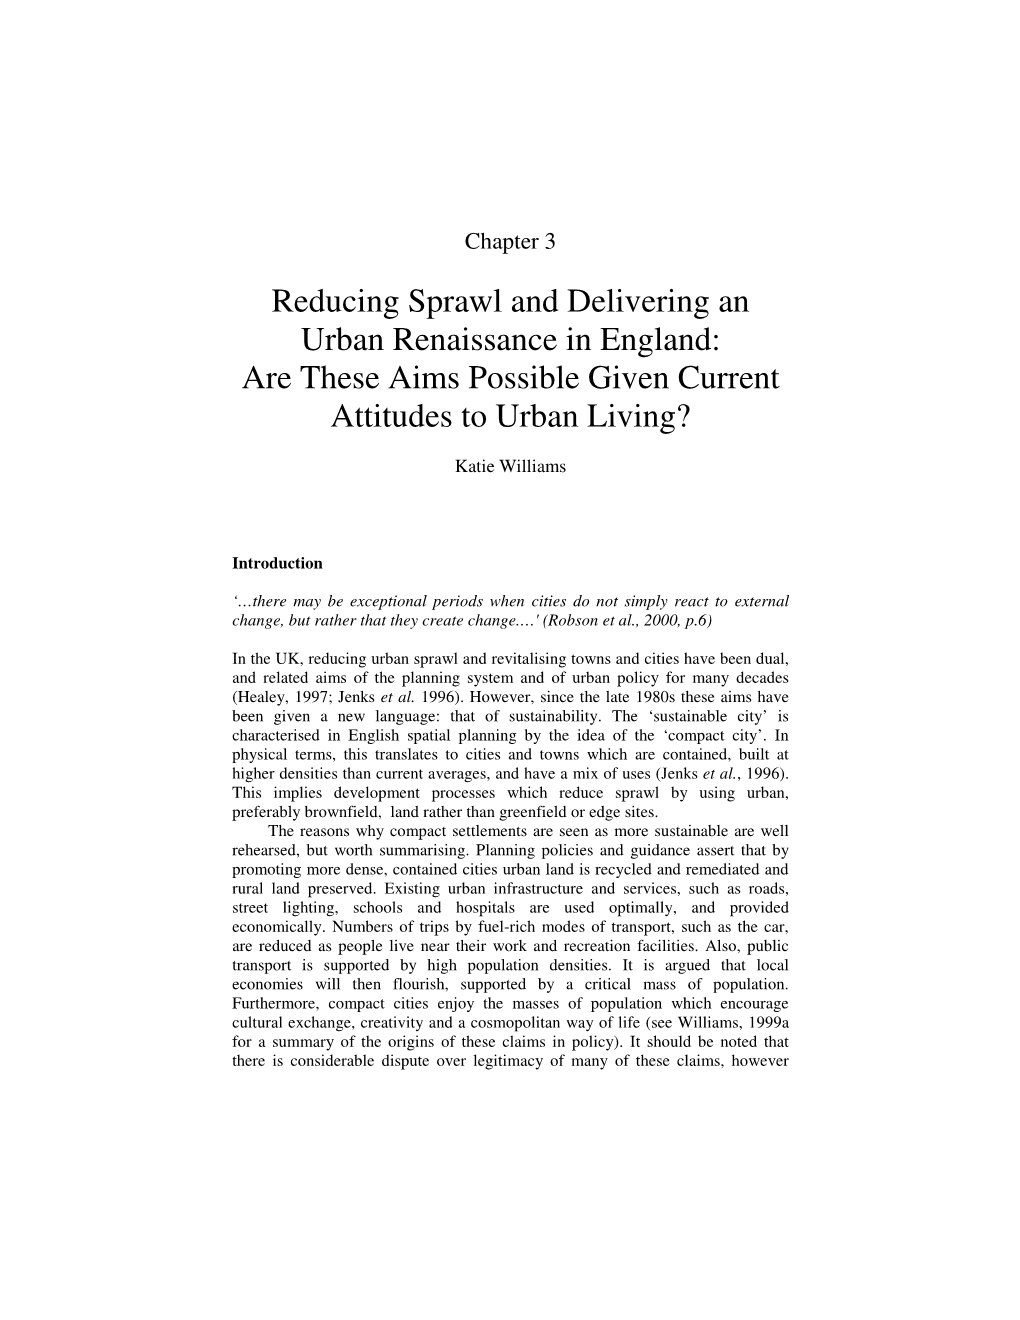 Reducing Sprawl and Delivering an Urban Renaissance in England: Are These Aims Possible Given Current Attitudes to Urban Living?